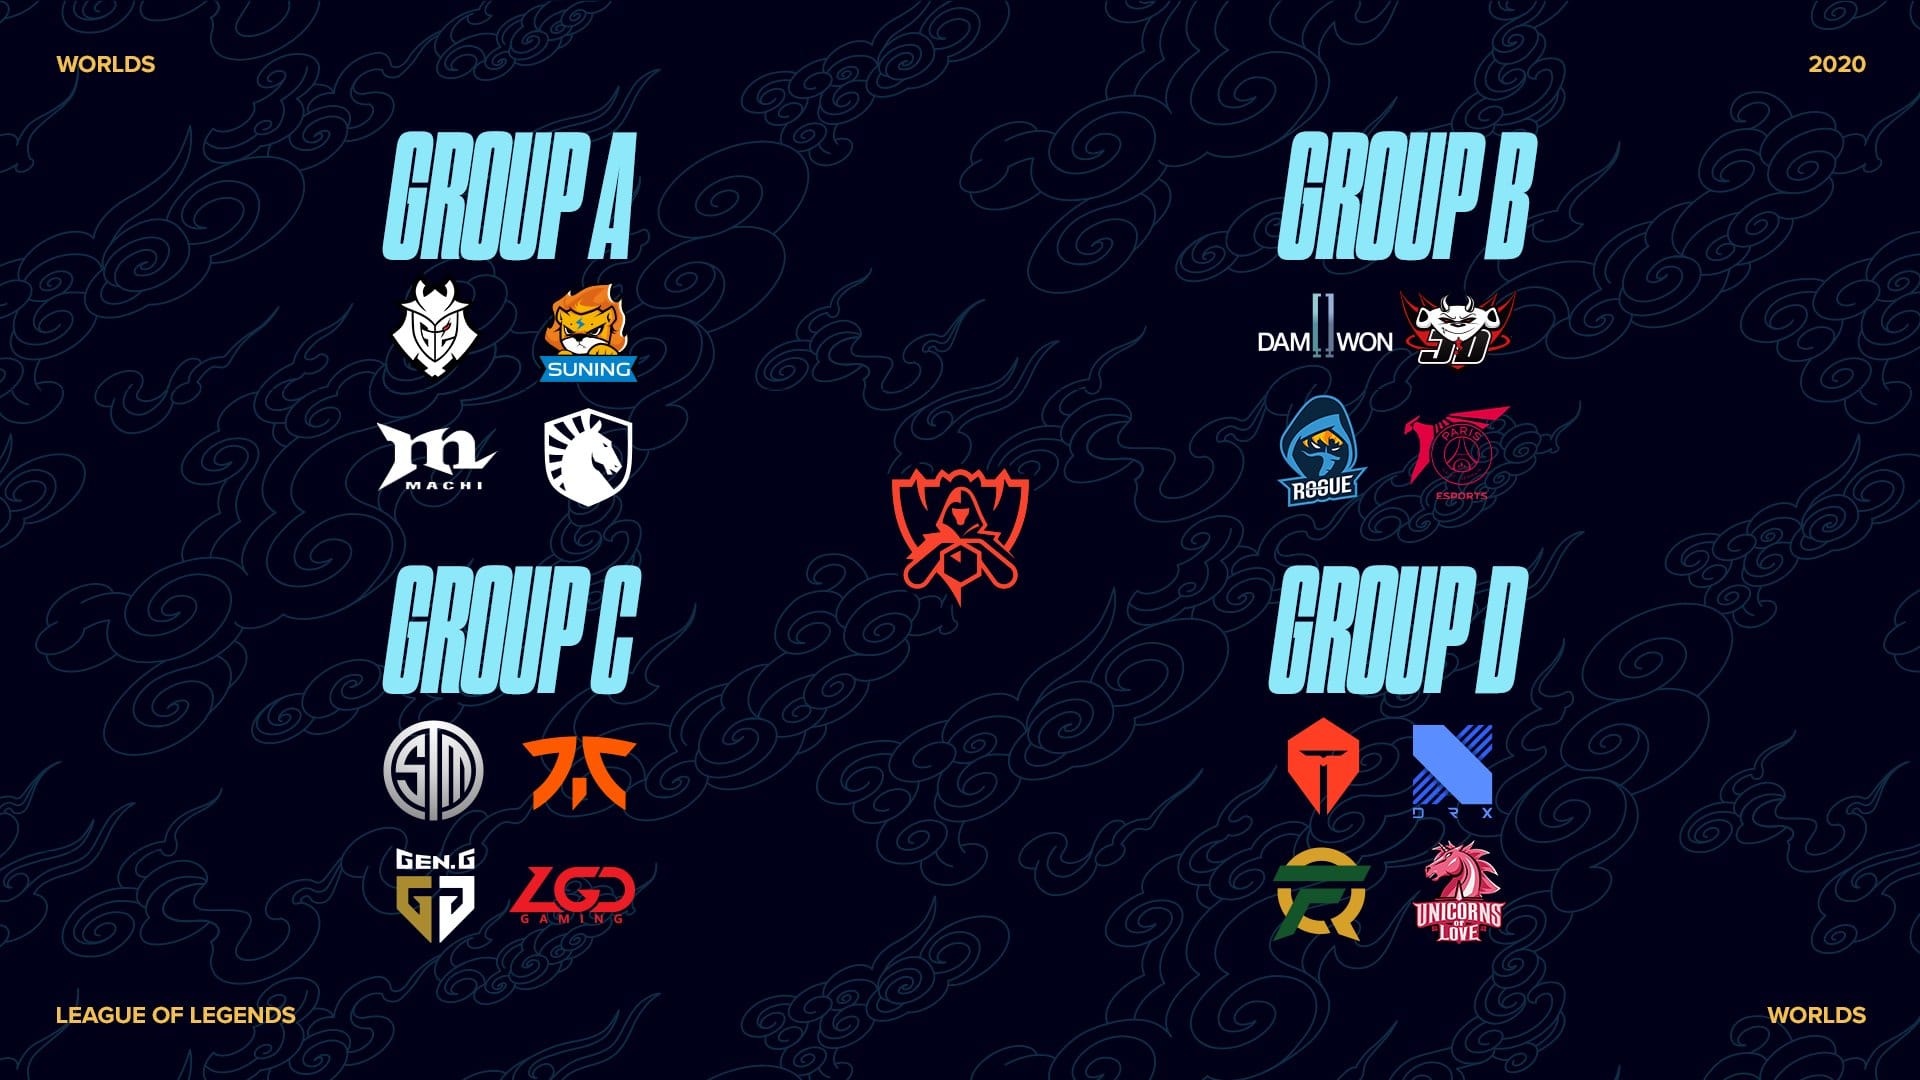 LoL Worlds 2020: Overview, Groups & Schedule